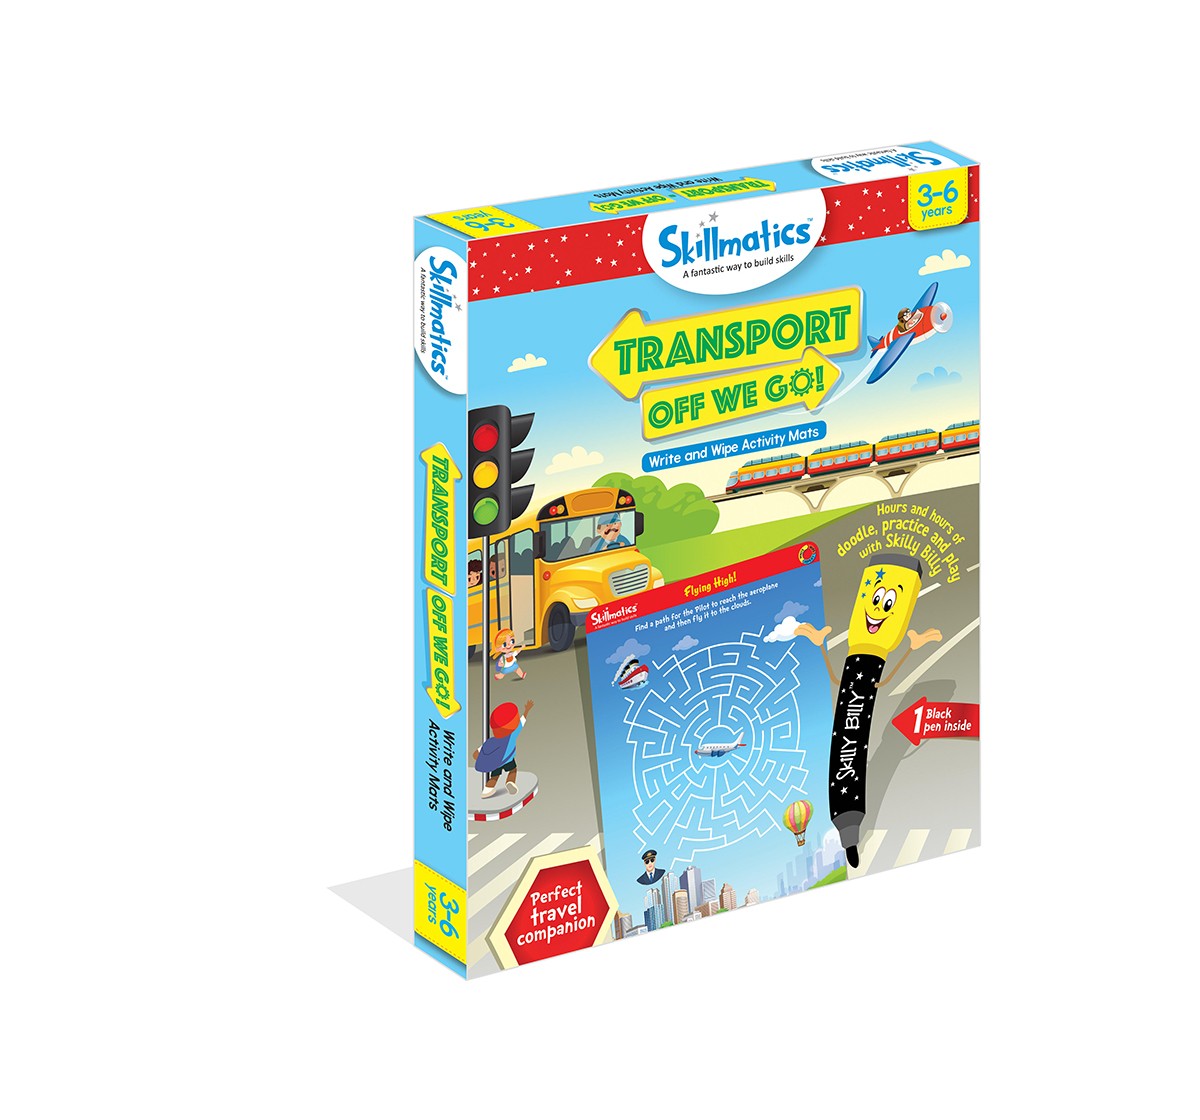  Skillmatics Transport Off We Go Games for Kids age 3Y+ 